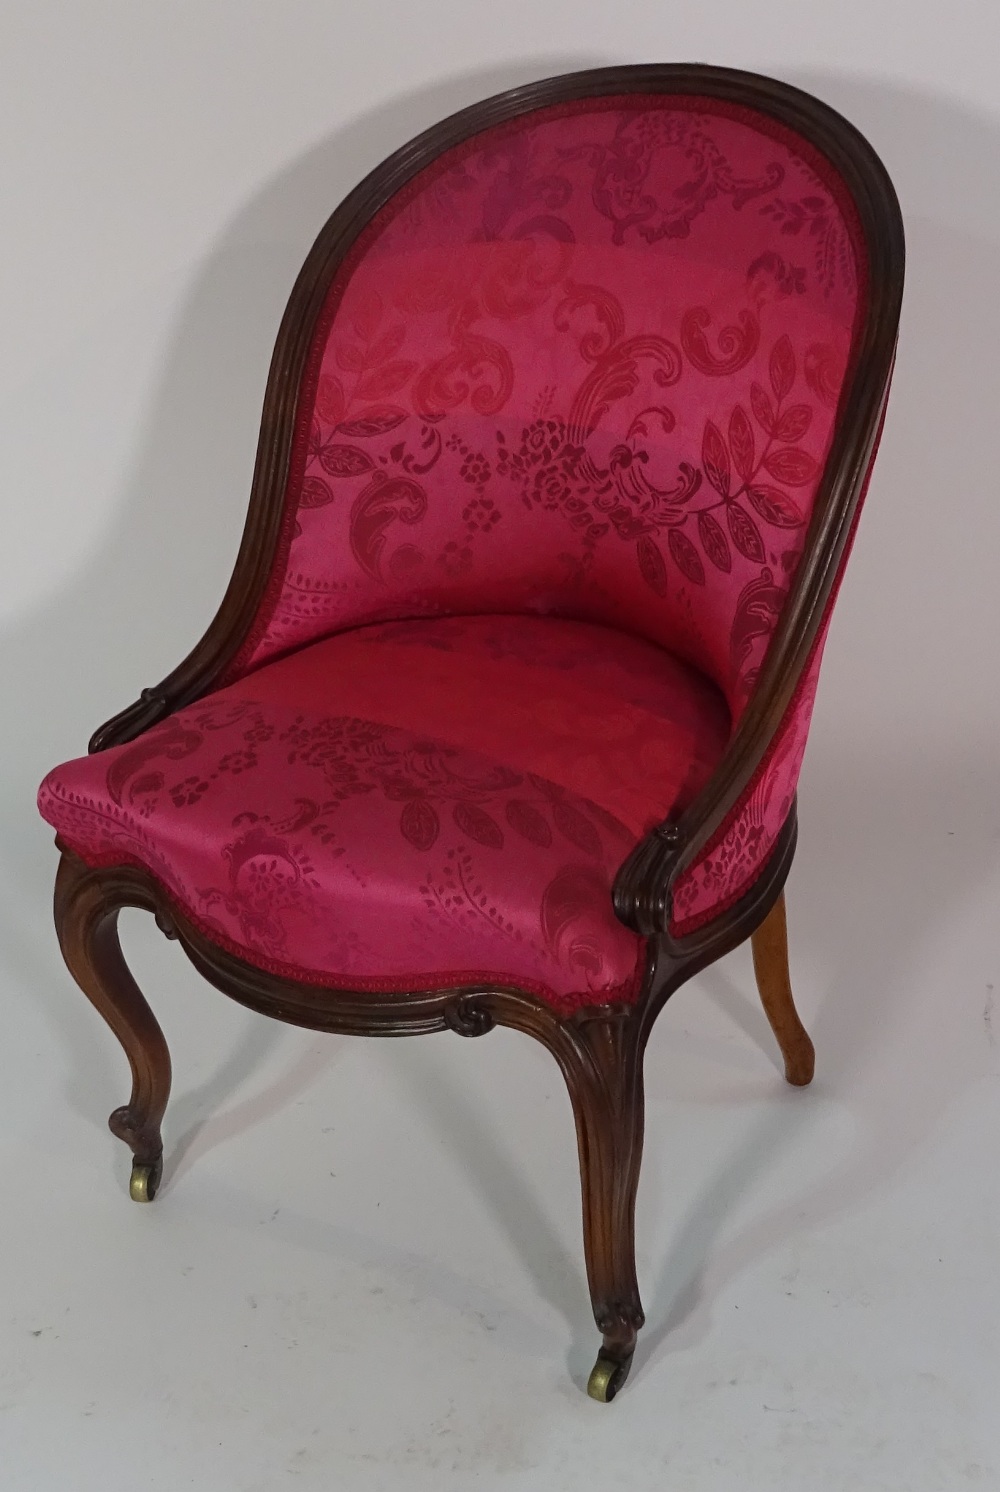 A 19th century French walnut framed pink upholstered nursing chair on cabriole supports, 77cm high. - Image 2 of 2